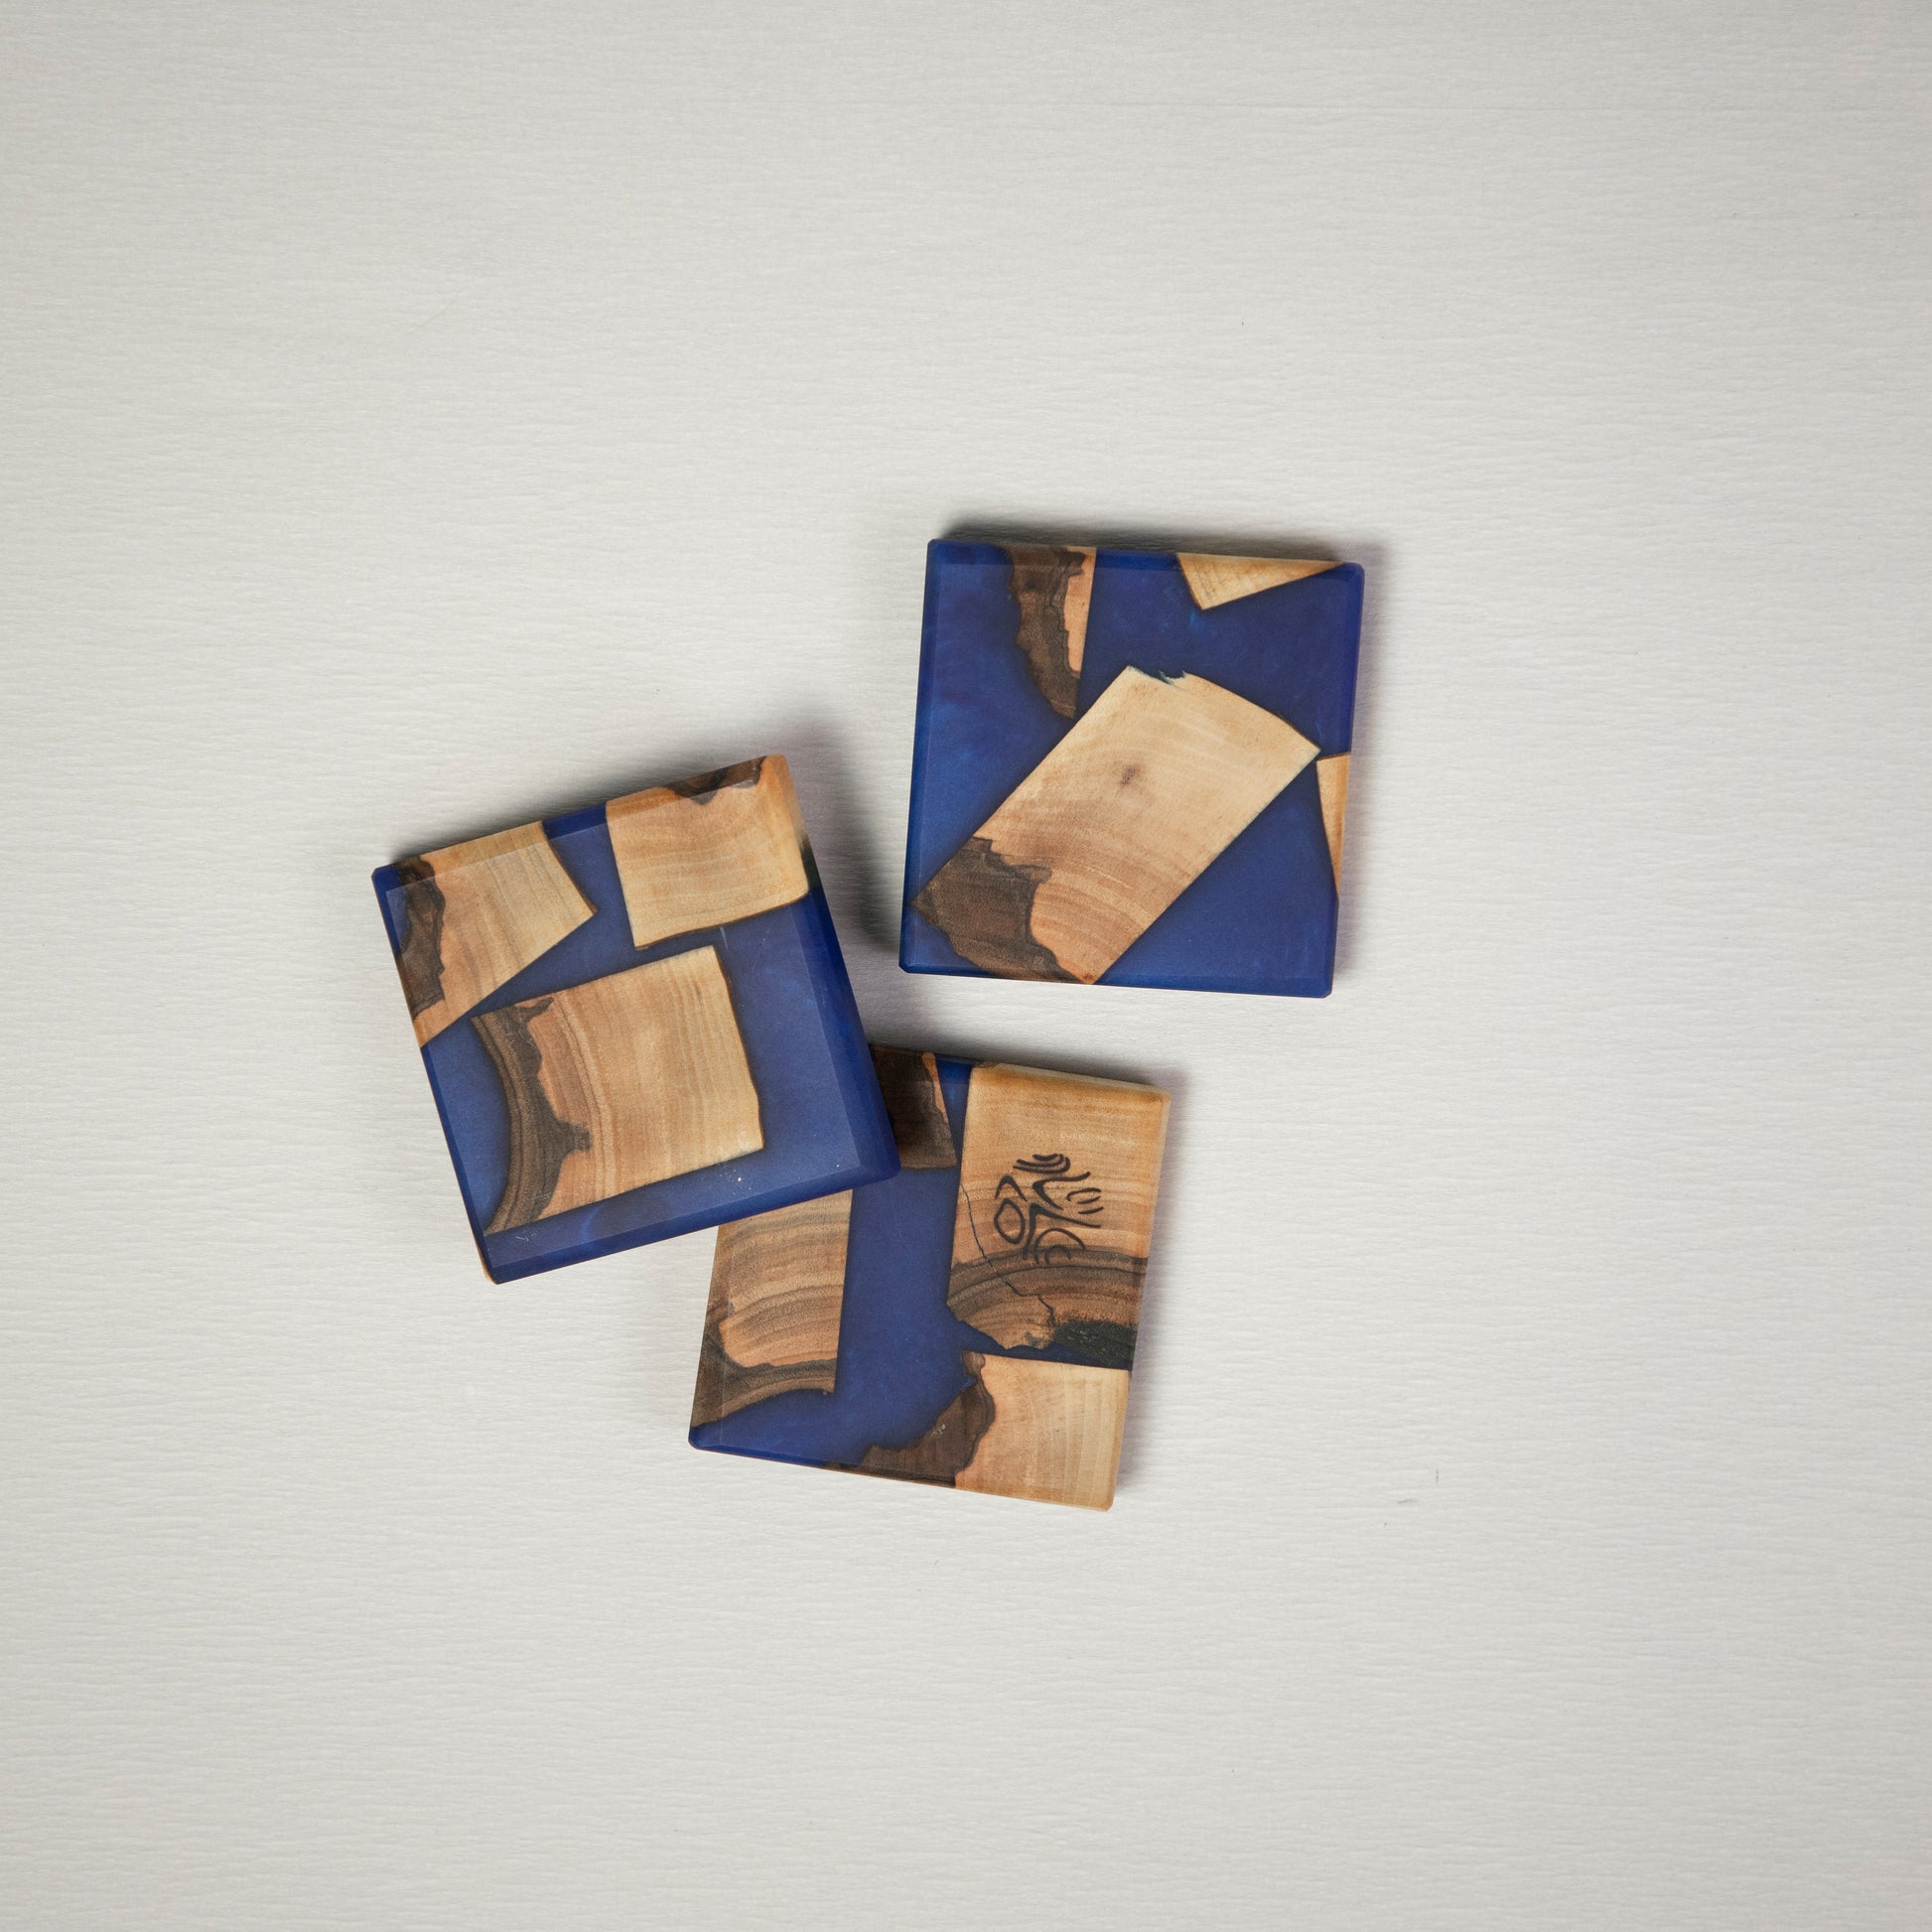 Three coasters made from wood and epoxy resin in the color deep saphire